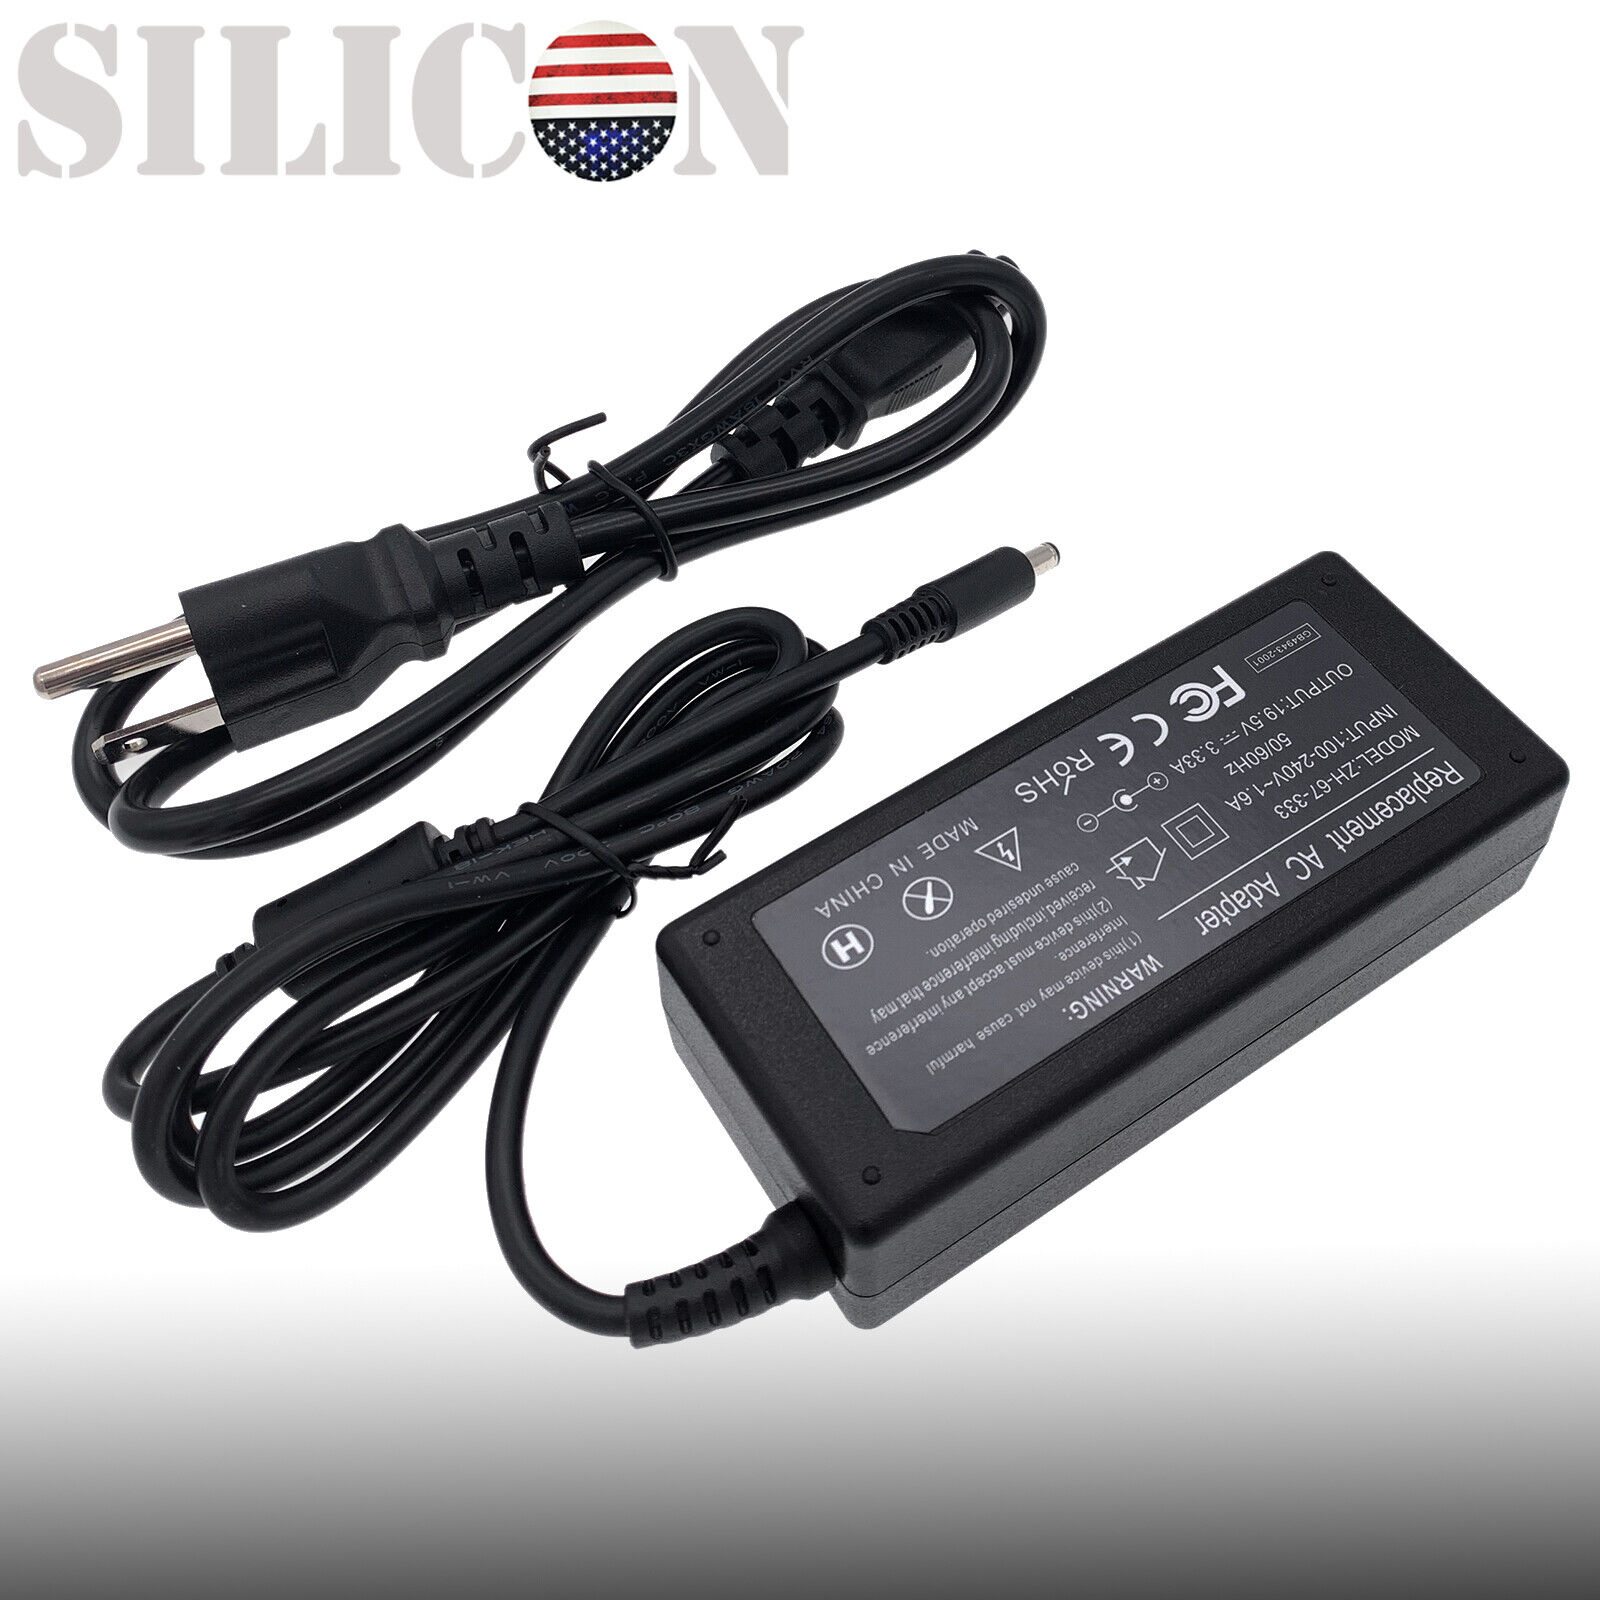 For HP 15z-gw000 15-gw0031cl 15-gw0052cl Laptop AC Adapter Charger Power Cord